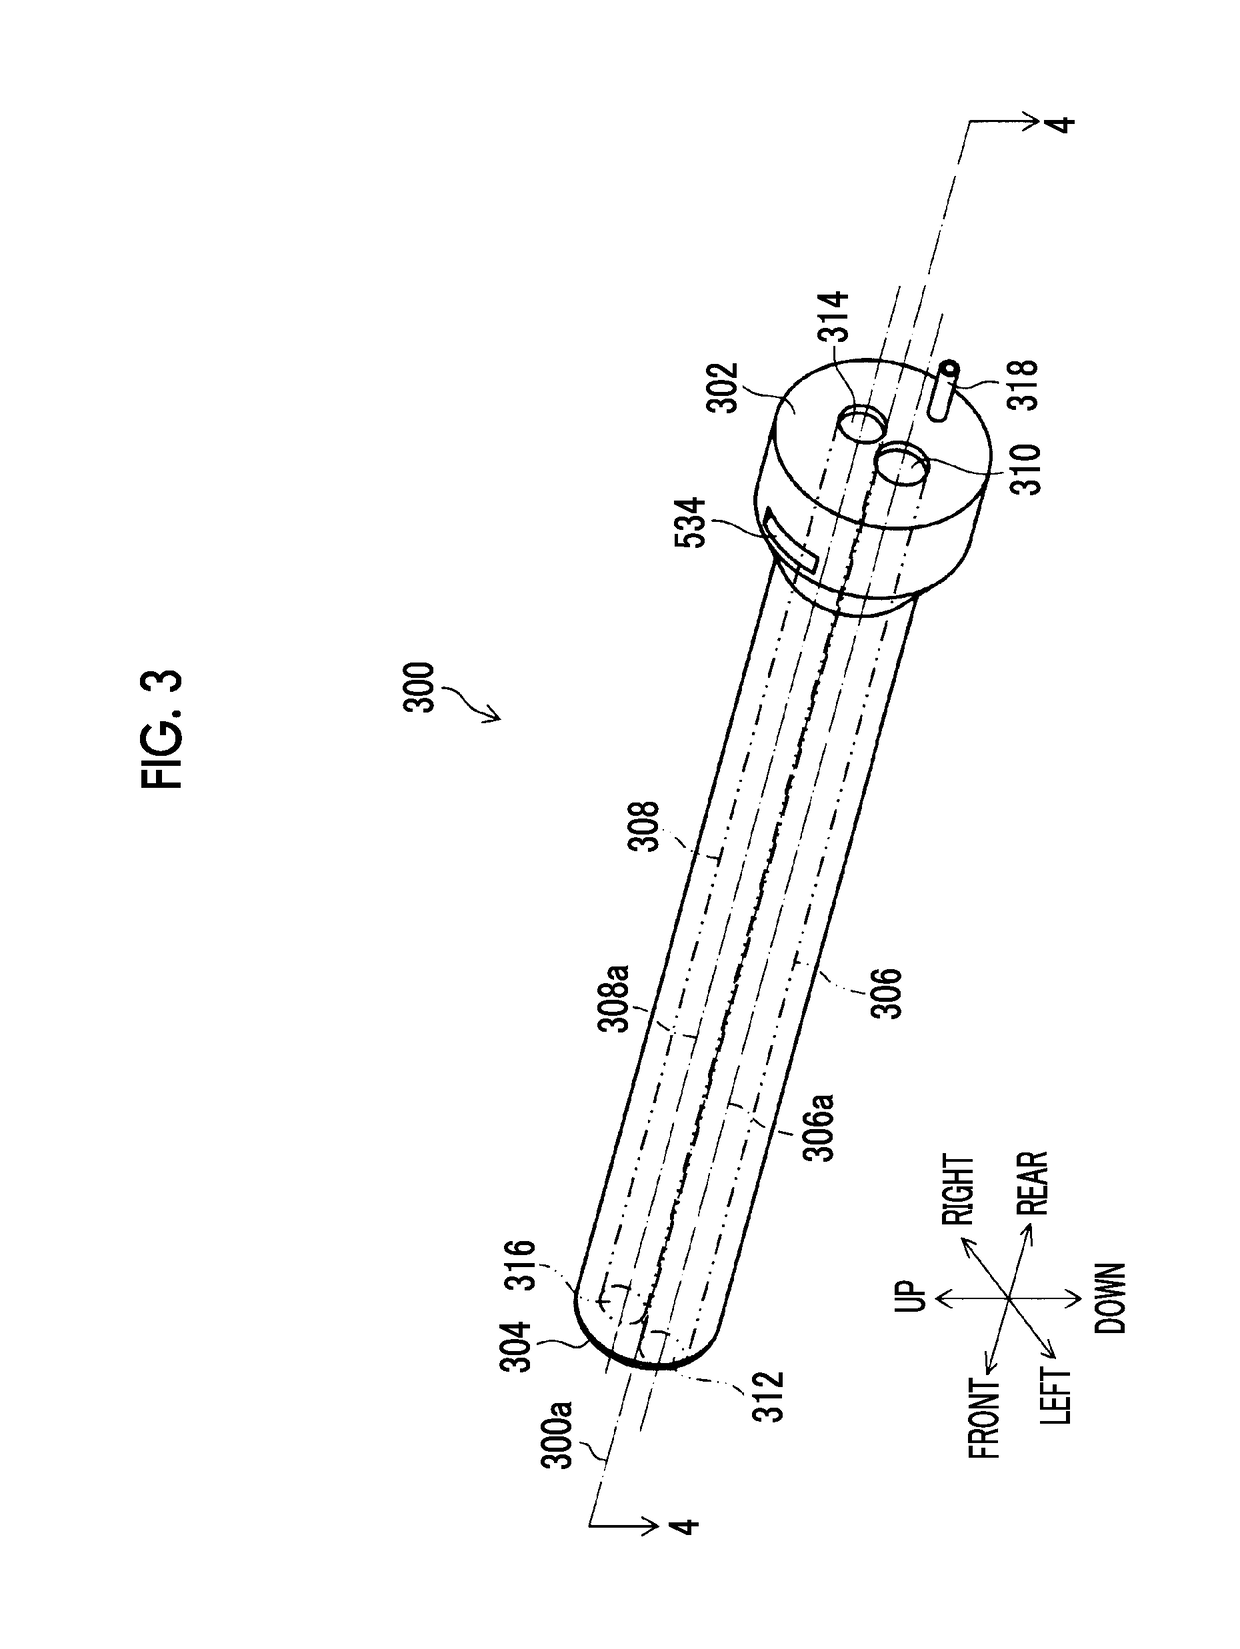 Endoscopic surgical device, overtube, and exterior tube